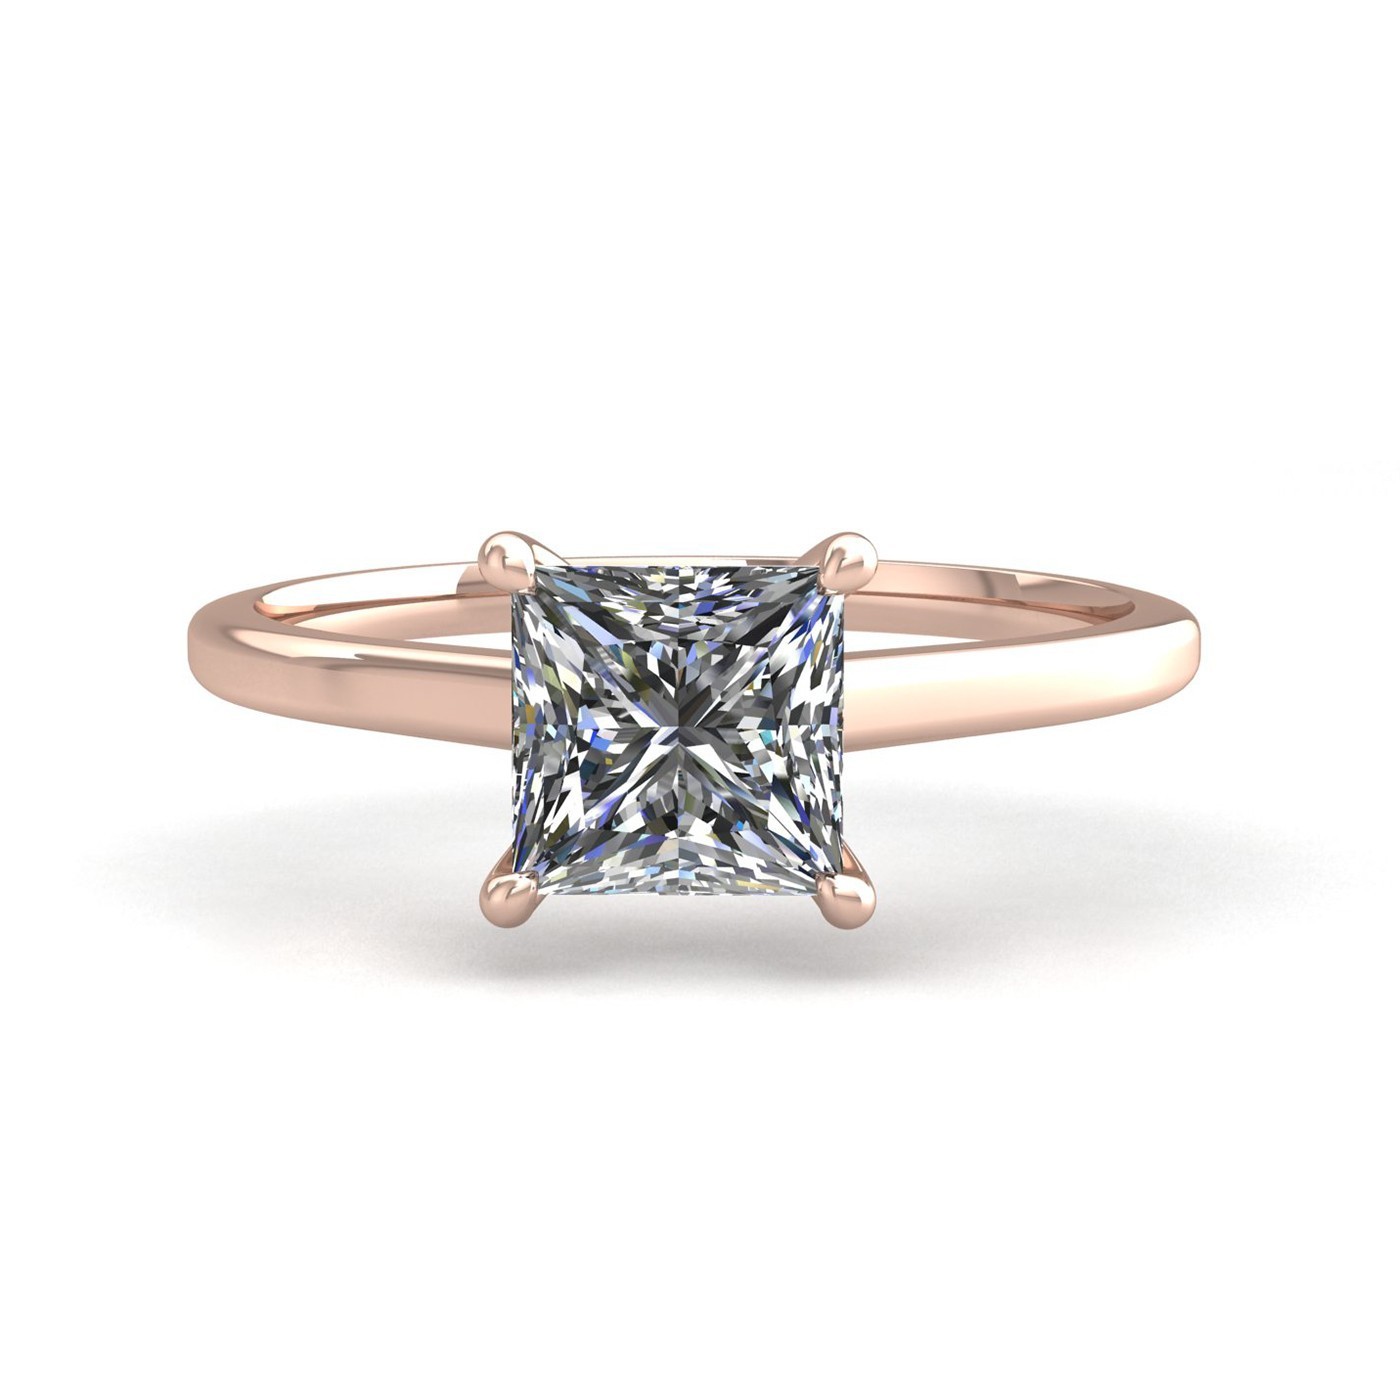 18k rose gold  1,00 ct 4 prongs solitaire princess cut diamond engagement ring with whisper thin band